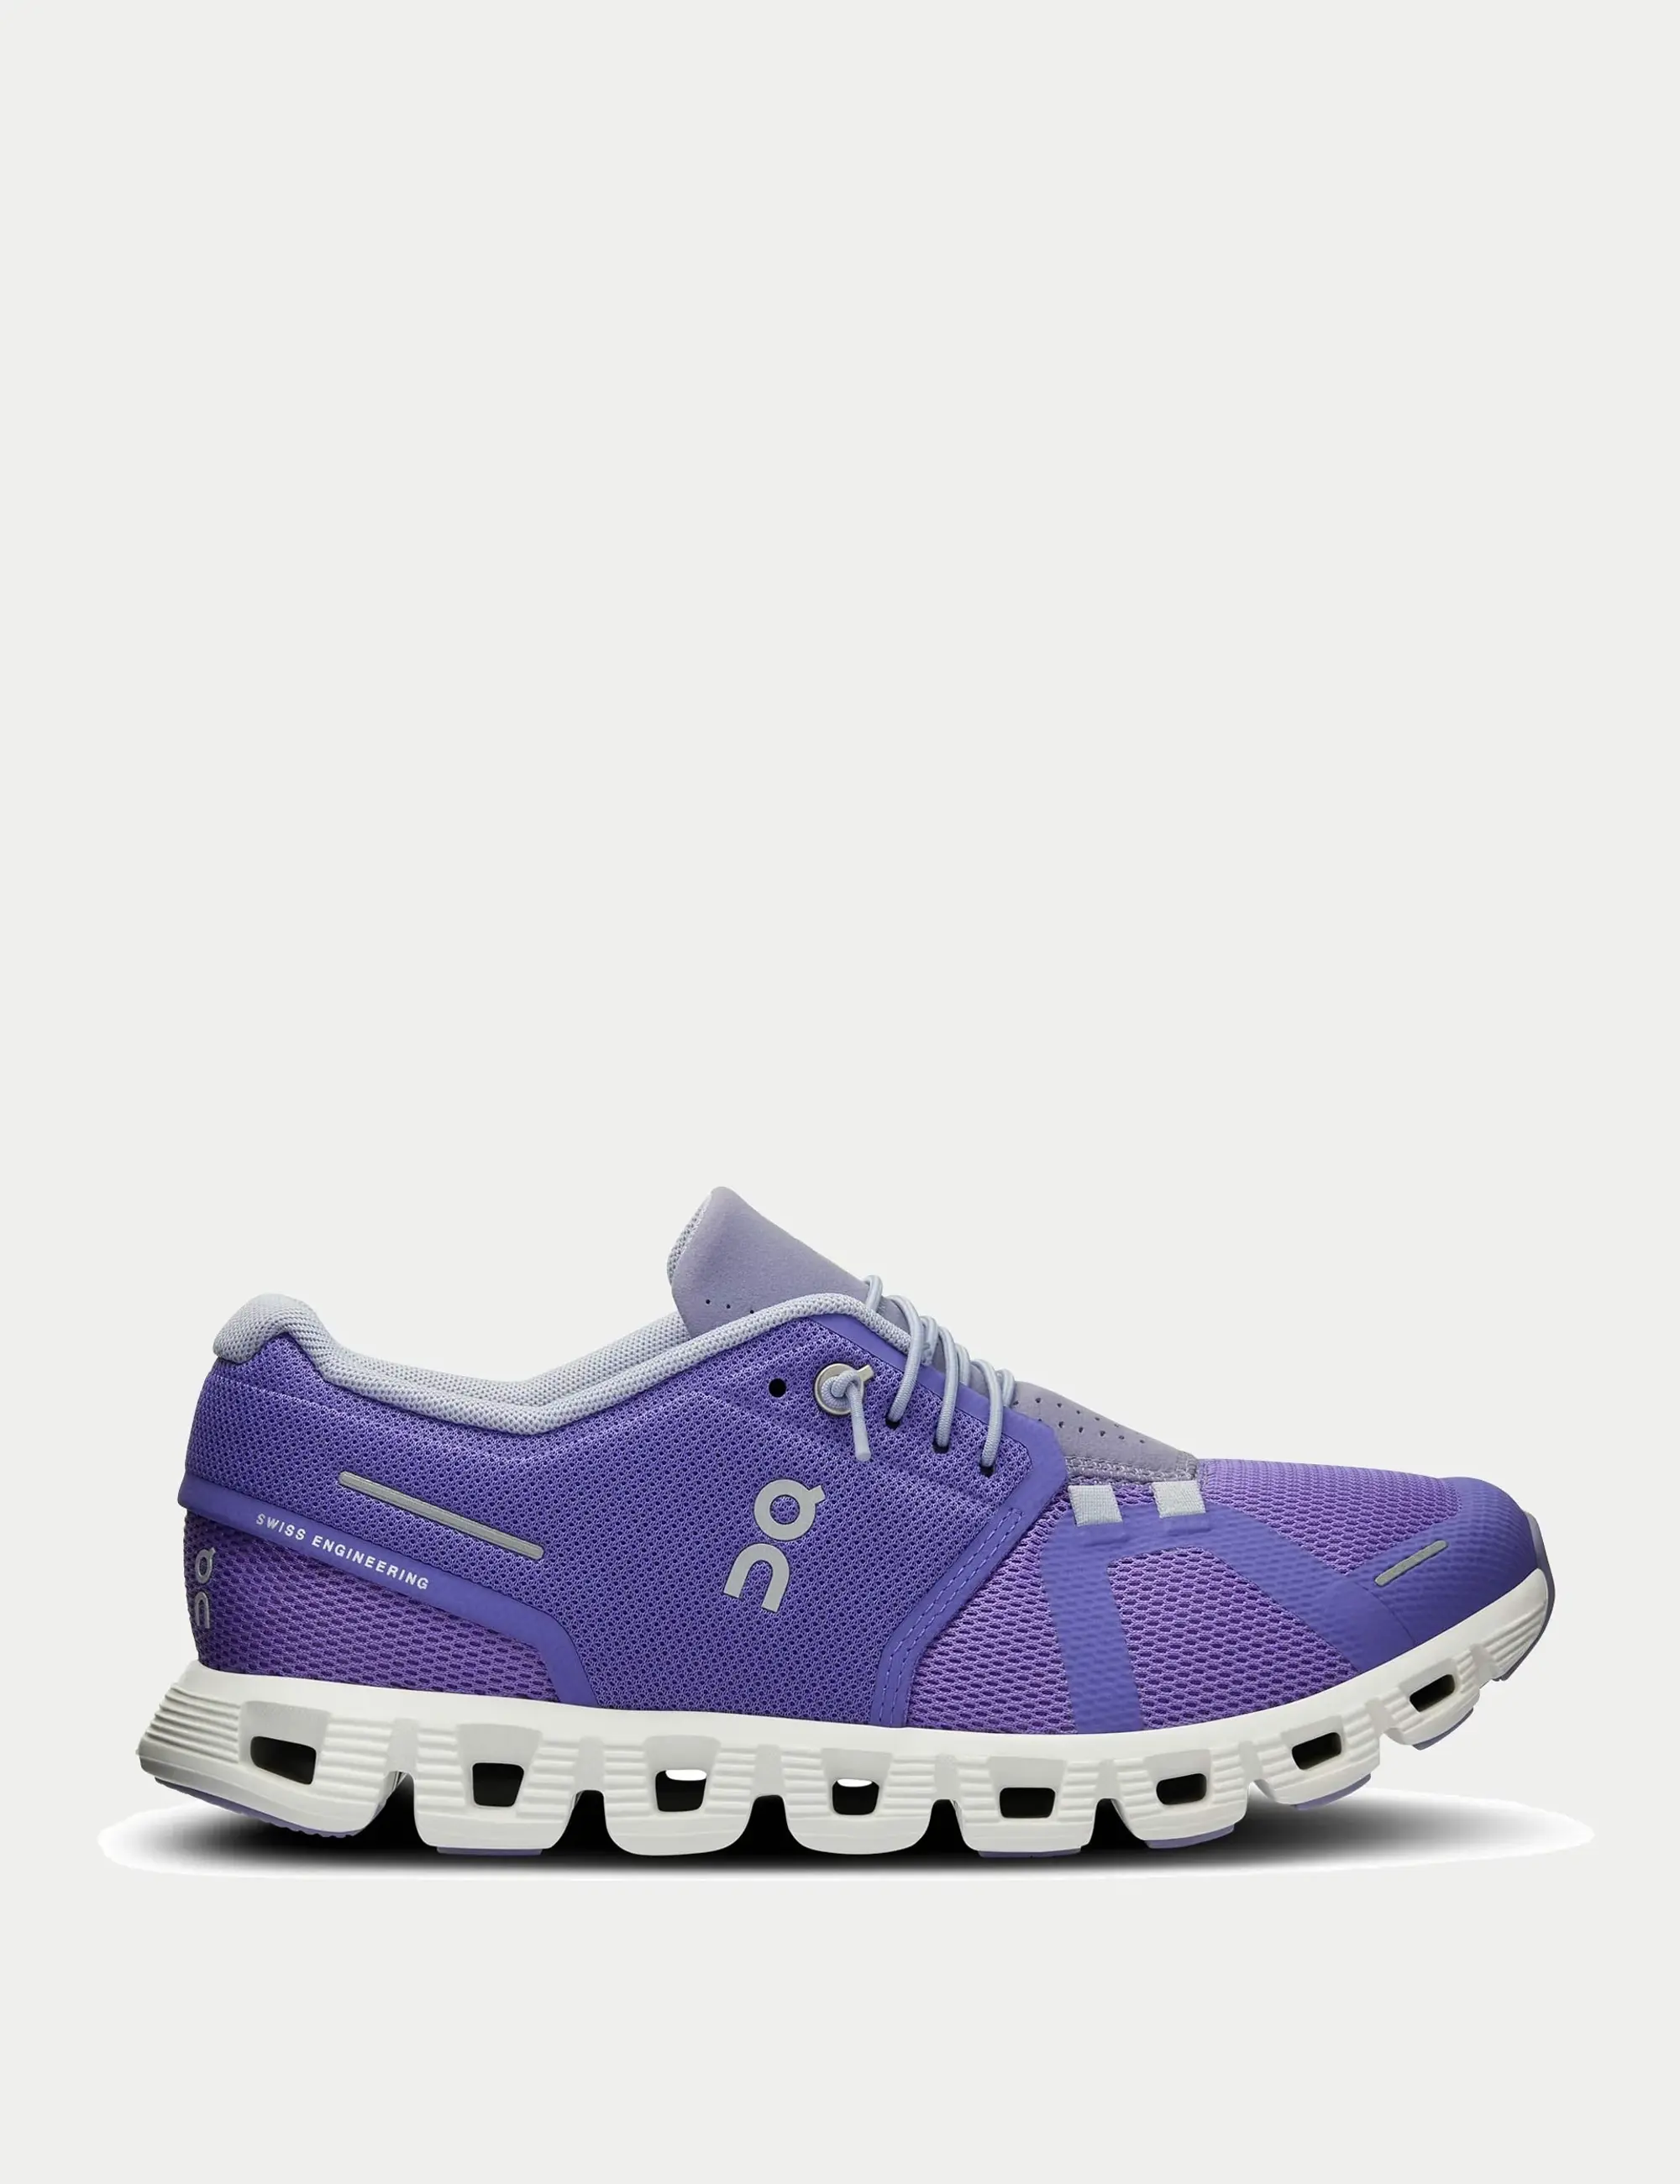 ON Running Cloud 5 - Blueberry/Feather - UK 8